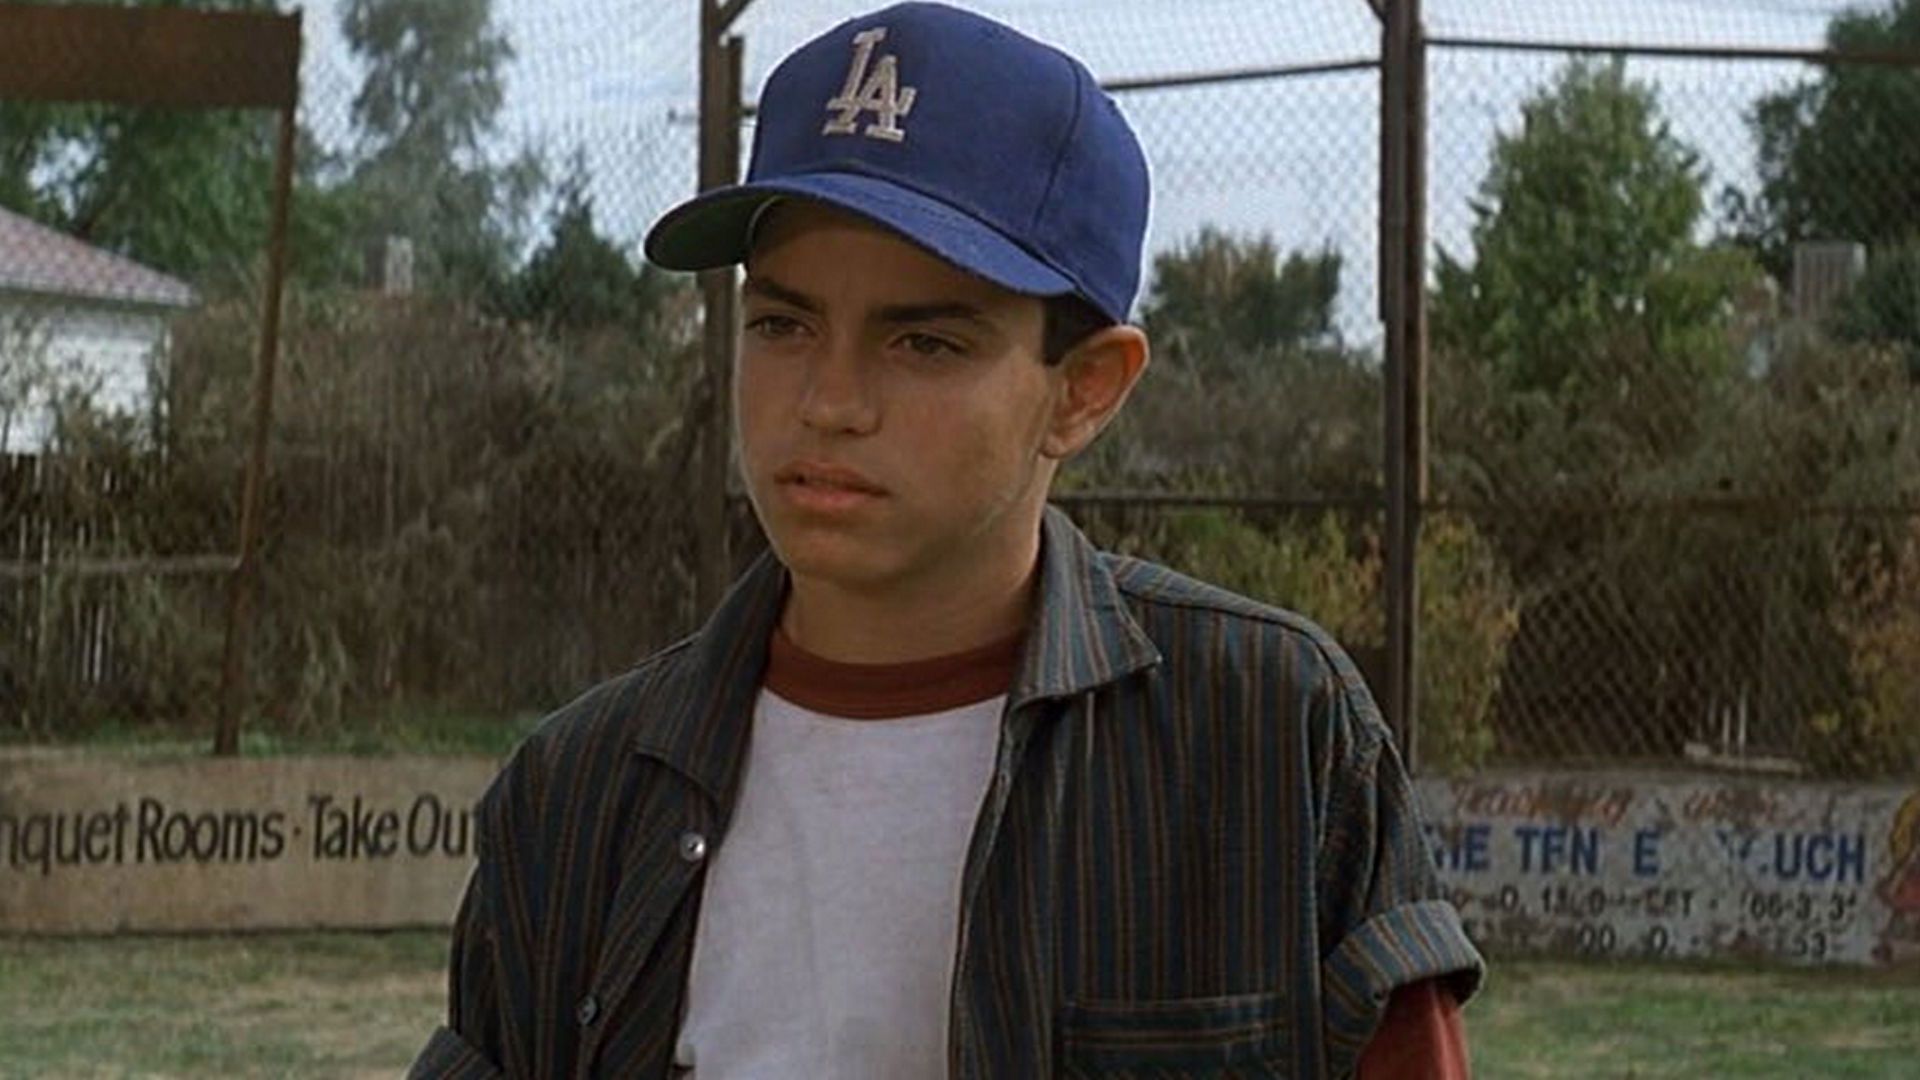 Actor who played Benny 'The Jet' Rodriguez from 'The Sandlot